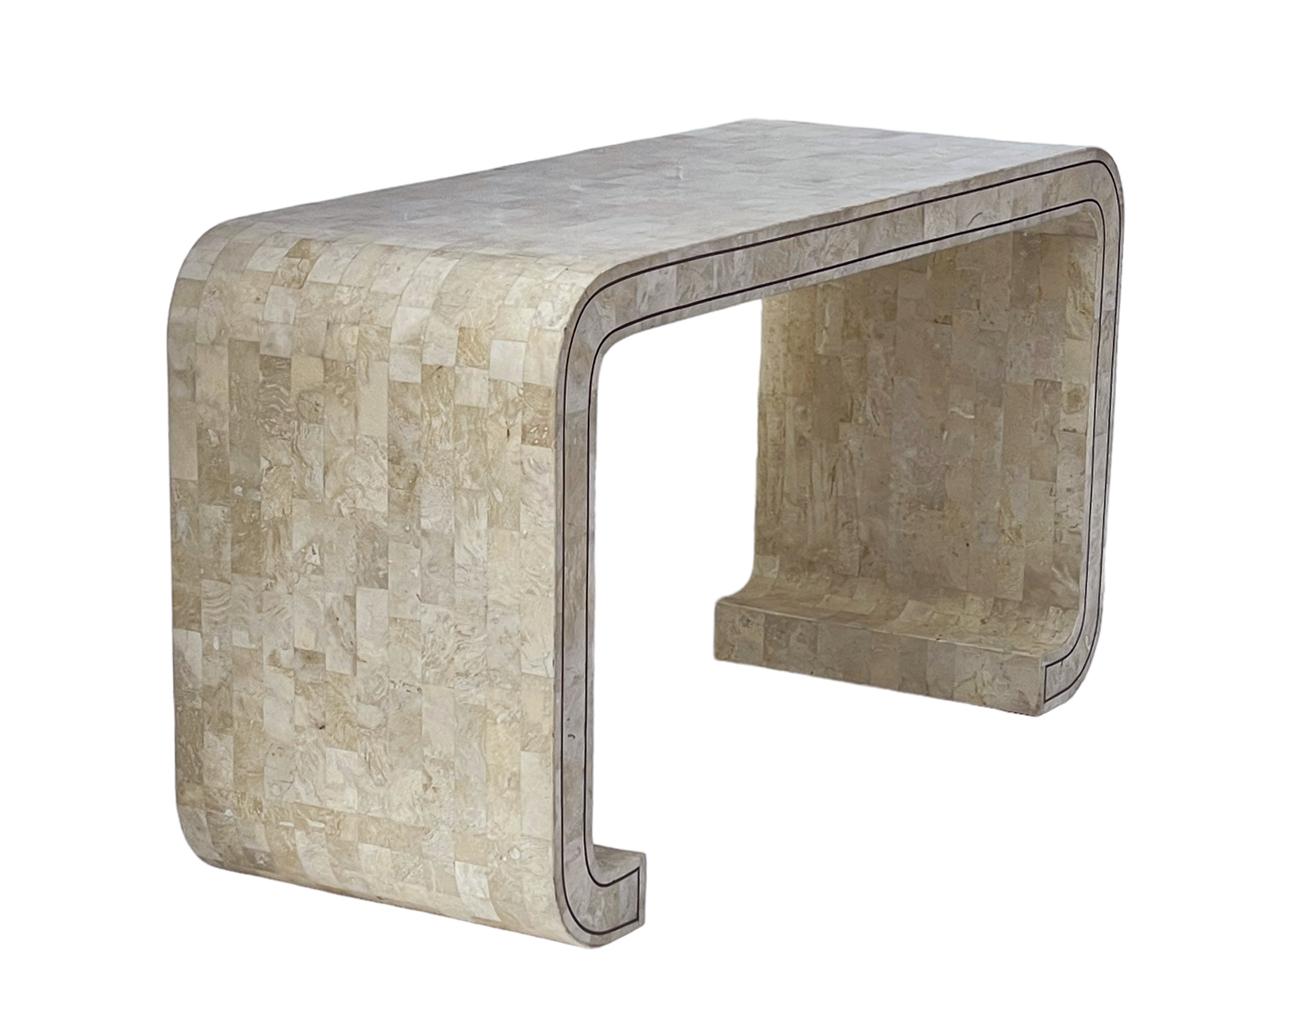 Gorgeous waterfall console in tessellated stone and probably made by maitland smith. Beautiful polished beige marble with inlayed brass trim. Very good ready to use condition. 